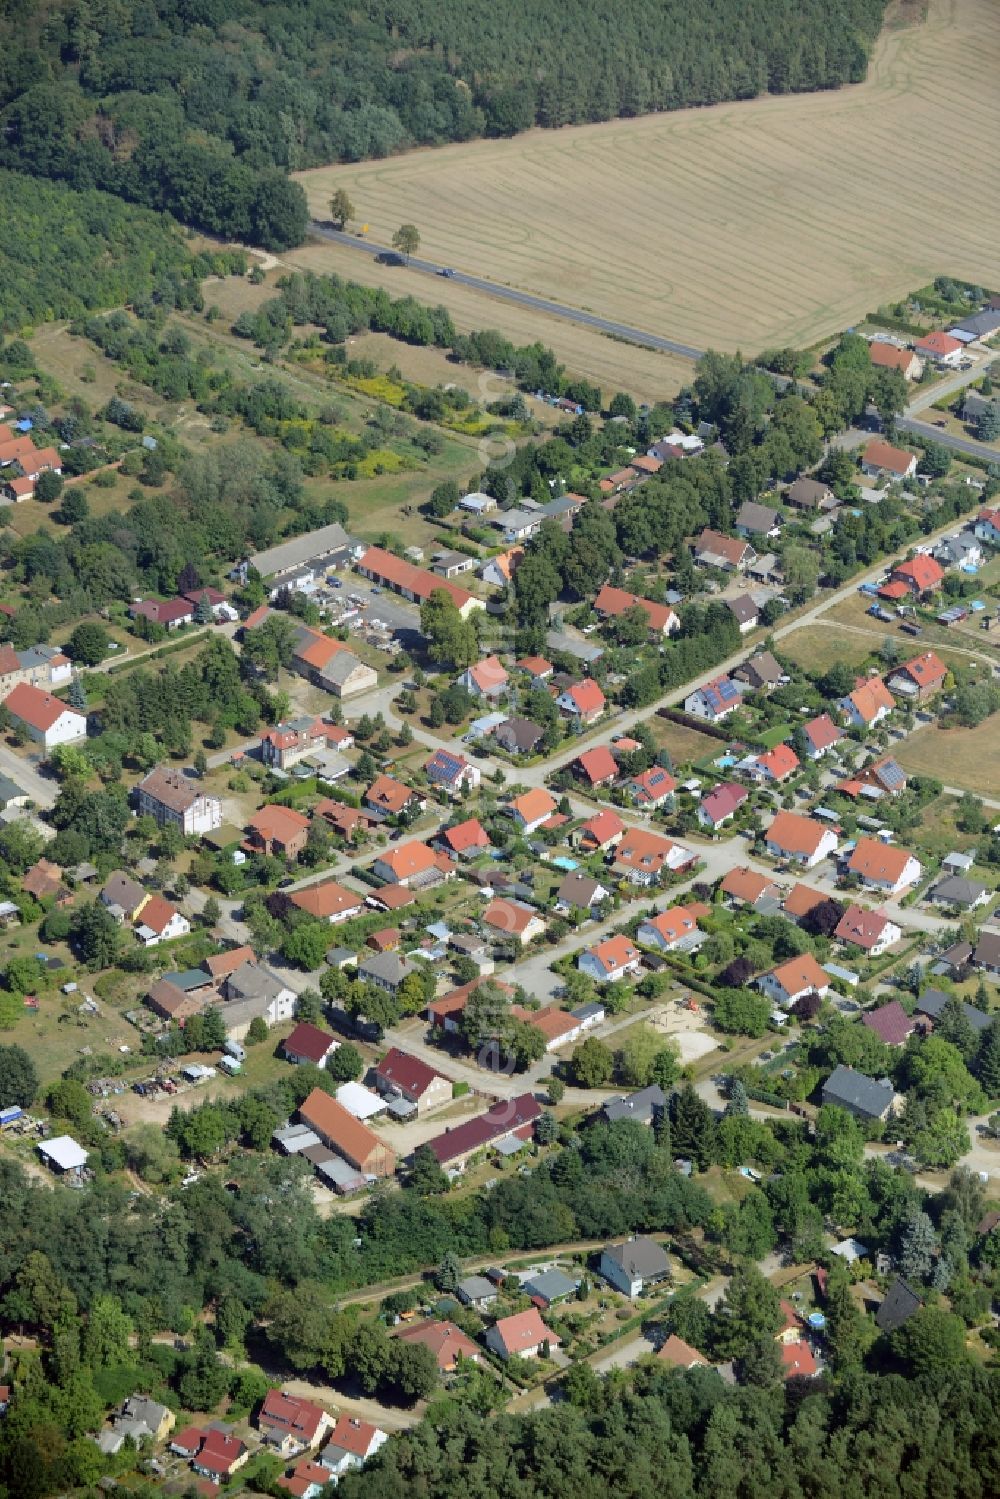 Rietz-Neuendorf from the bird's eye view: View of the Alt-Golm part in the North of the borough of Rietz-Neuendorf in the state of Brandenburg. The residential village is surrounded by fields and forest